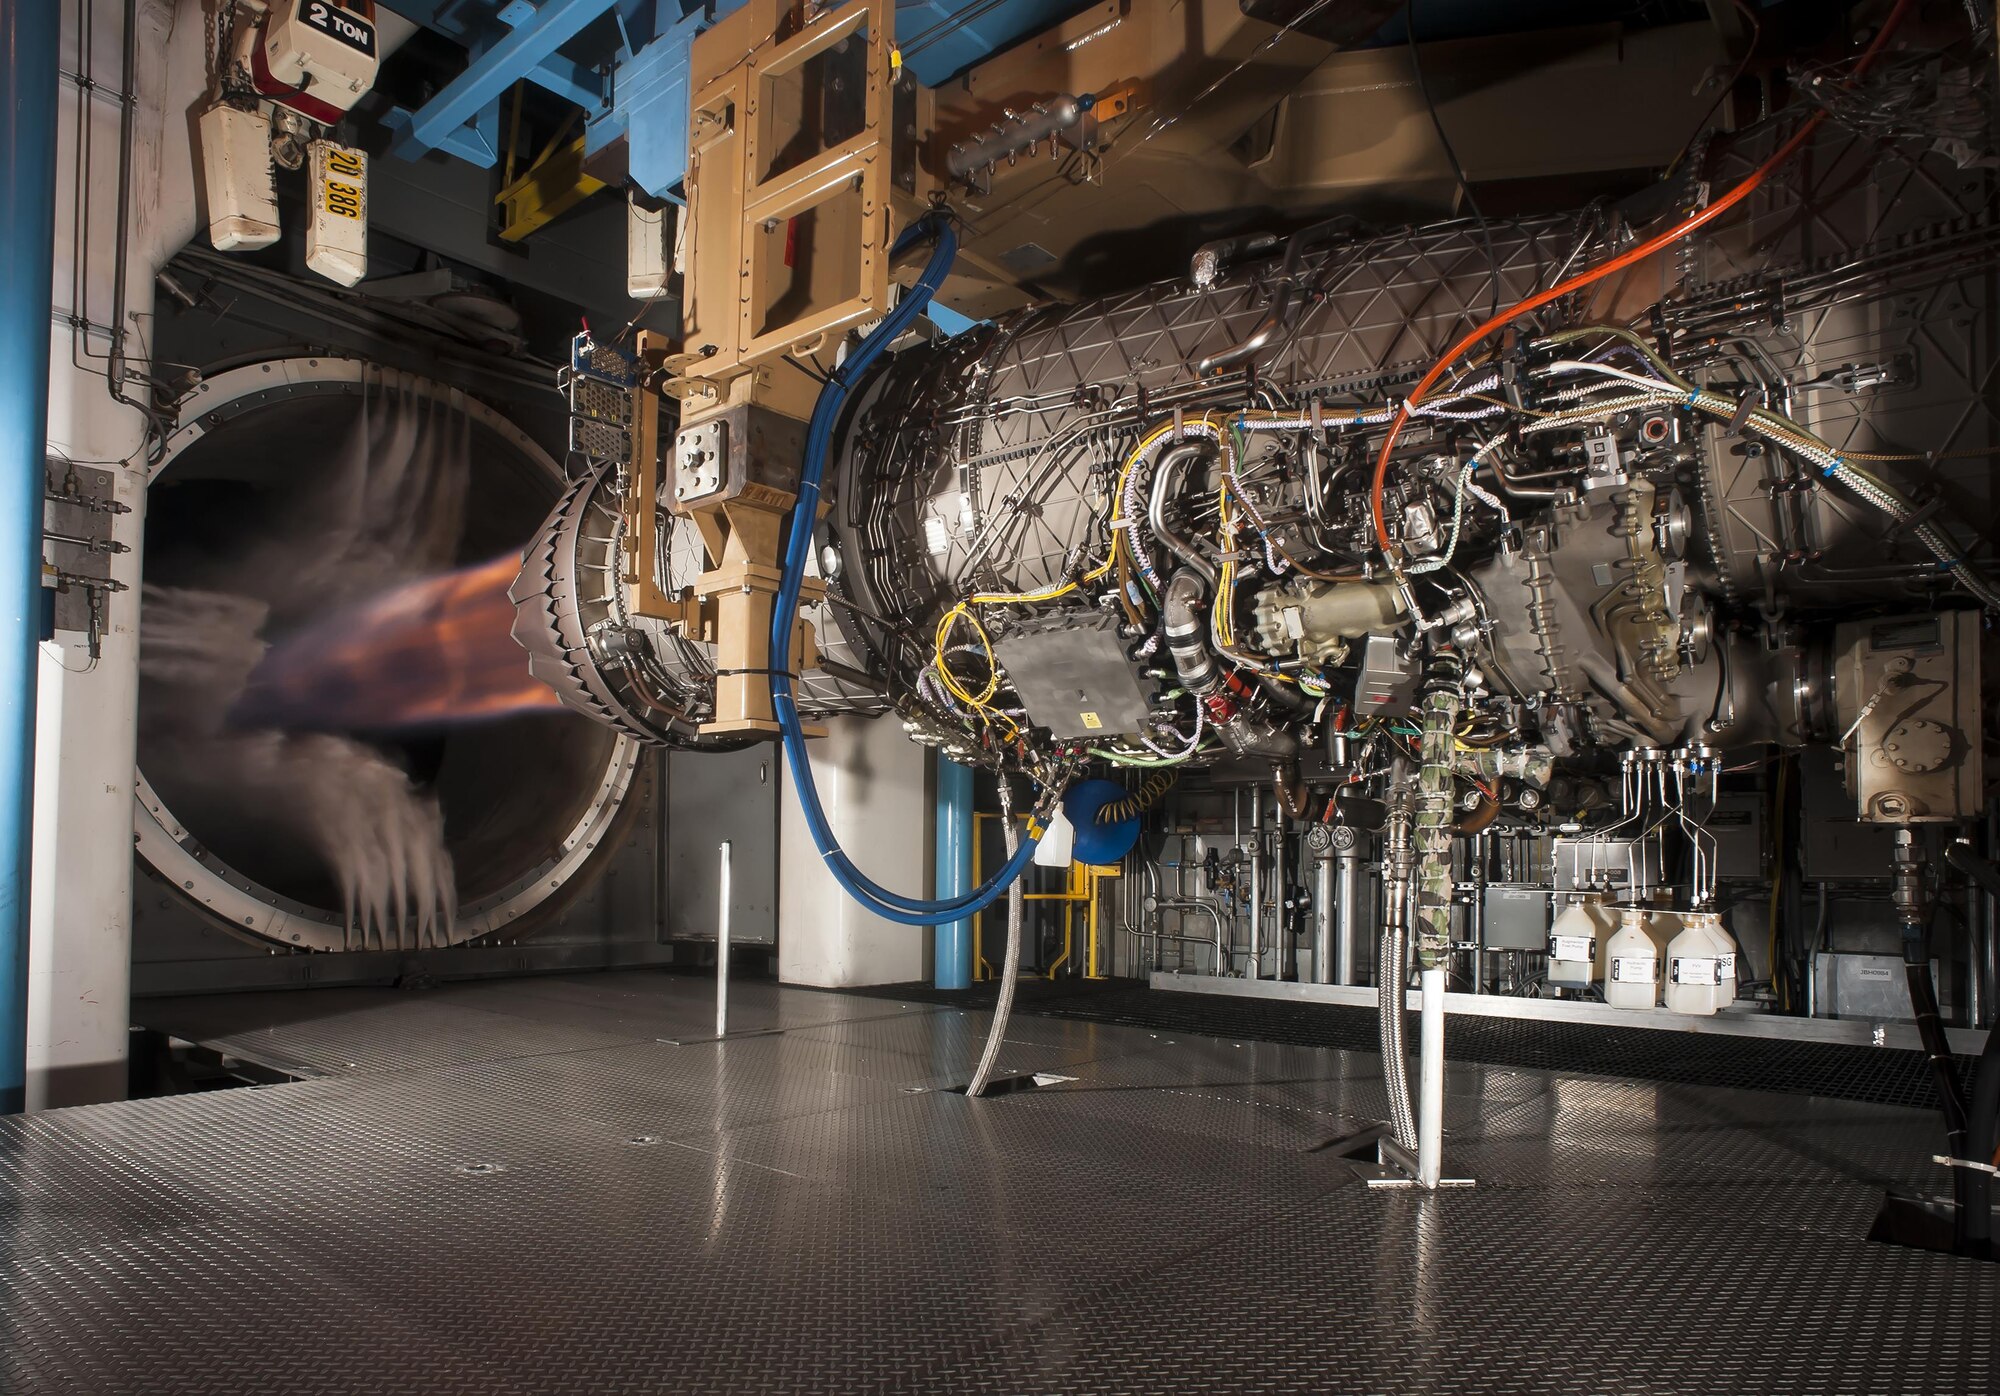 Pratt & Whitney’s F135 engine, used in the F-35 Lightning II, successfully demonstrated hot-life capability during Accelerated Mission Testing at AEDC. Pictured here is the engine during testing in the Engine Test Facility Sea Level 2 Test Cell. (Photo by Rick Goodfriend)